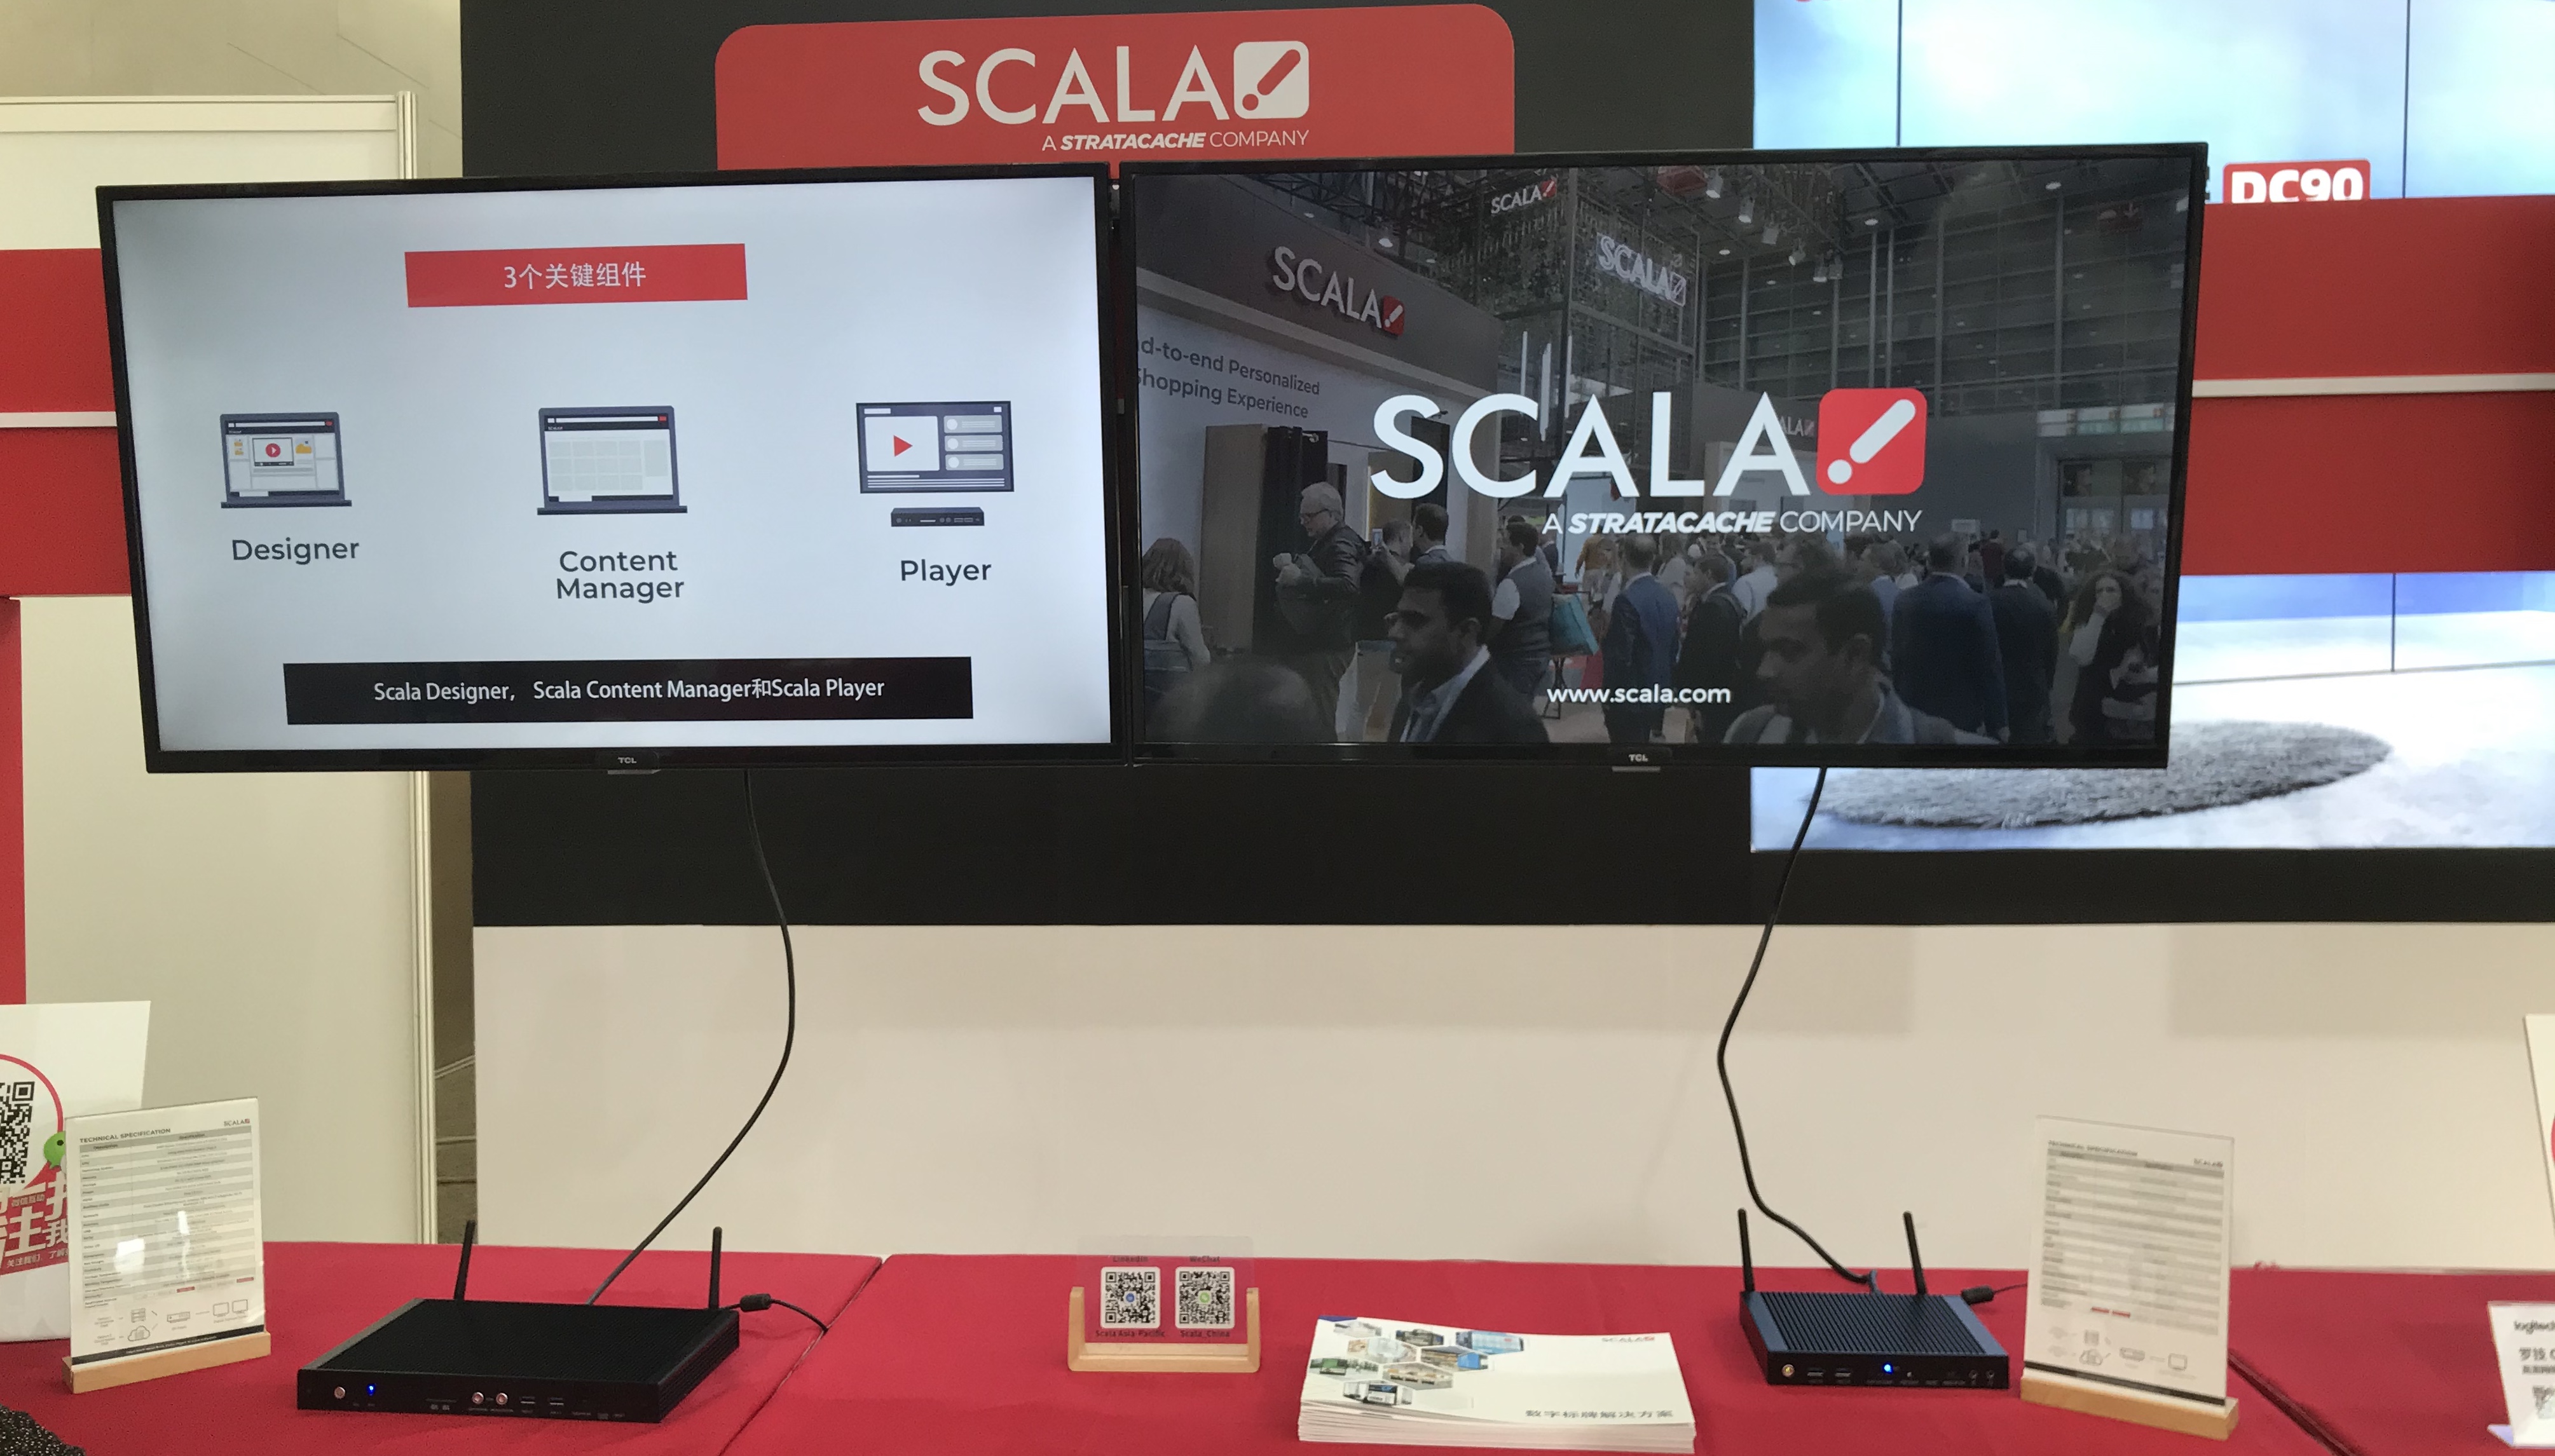 Scala presents Marketing Technology solutions on InfoComm China 2021 trade show